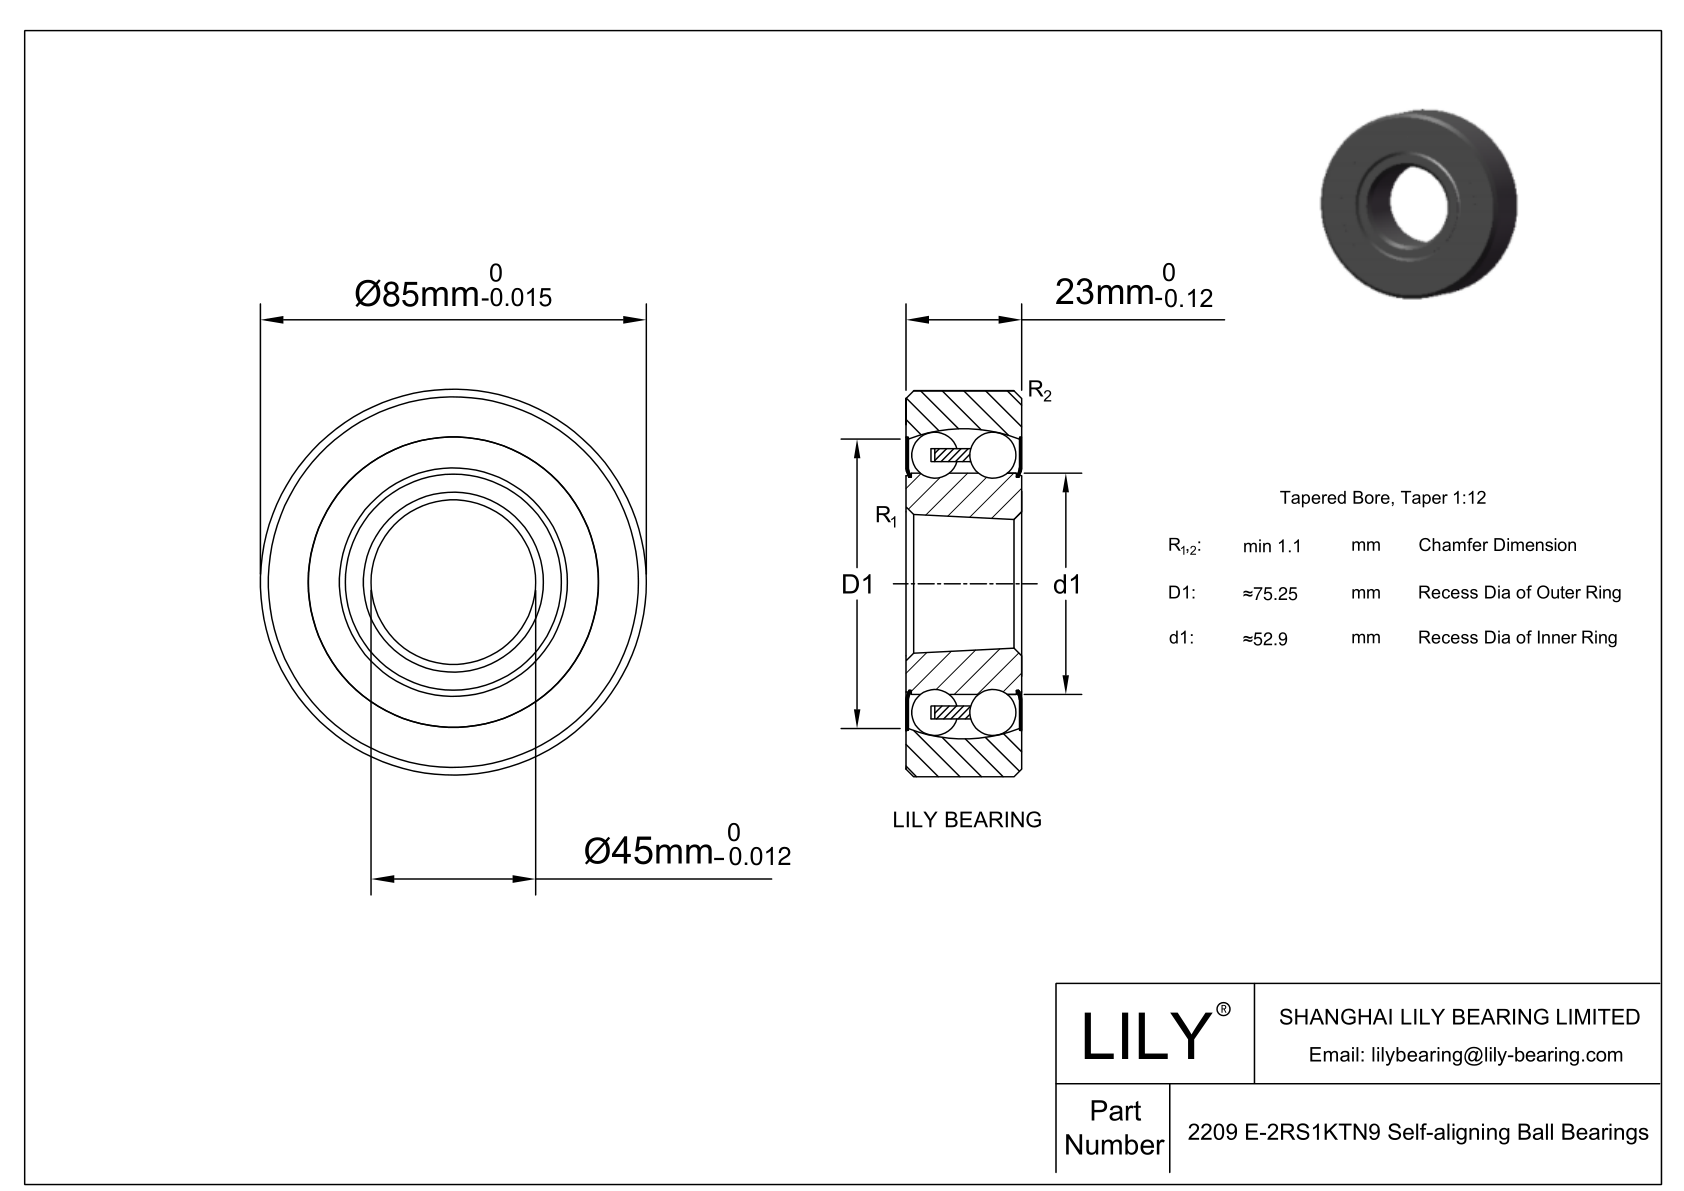 S2209 E-2RS1KTN9 Stainless Steel Self Aligning Ball Bearings cad drawing